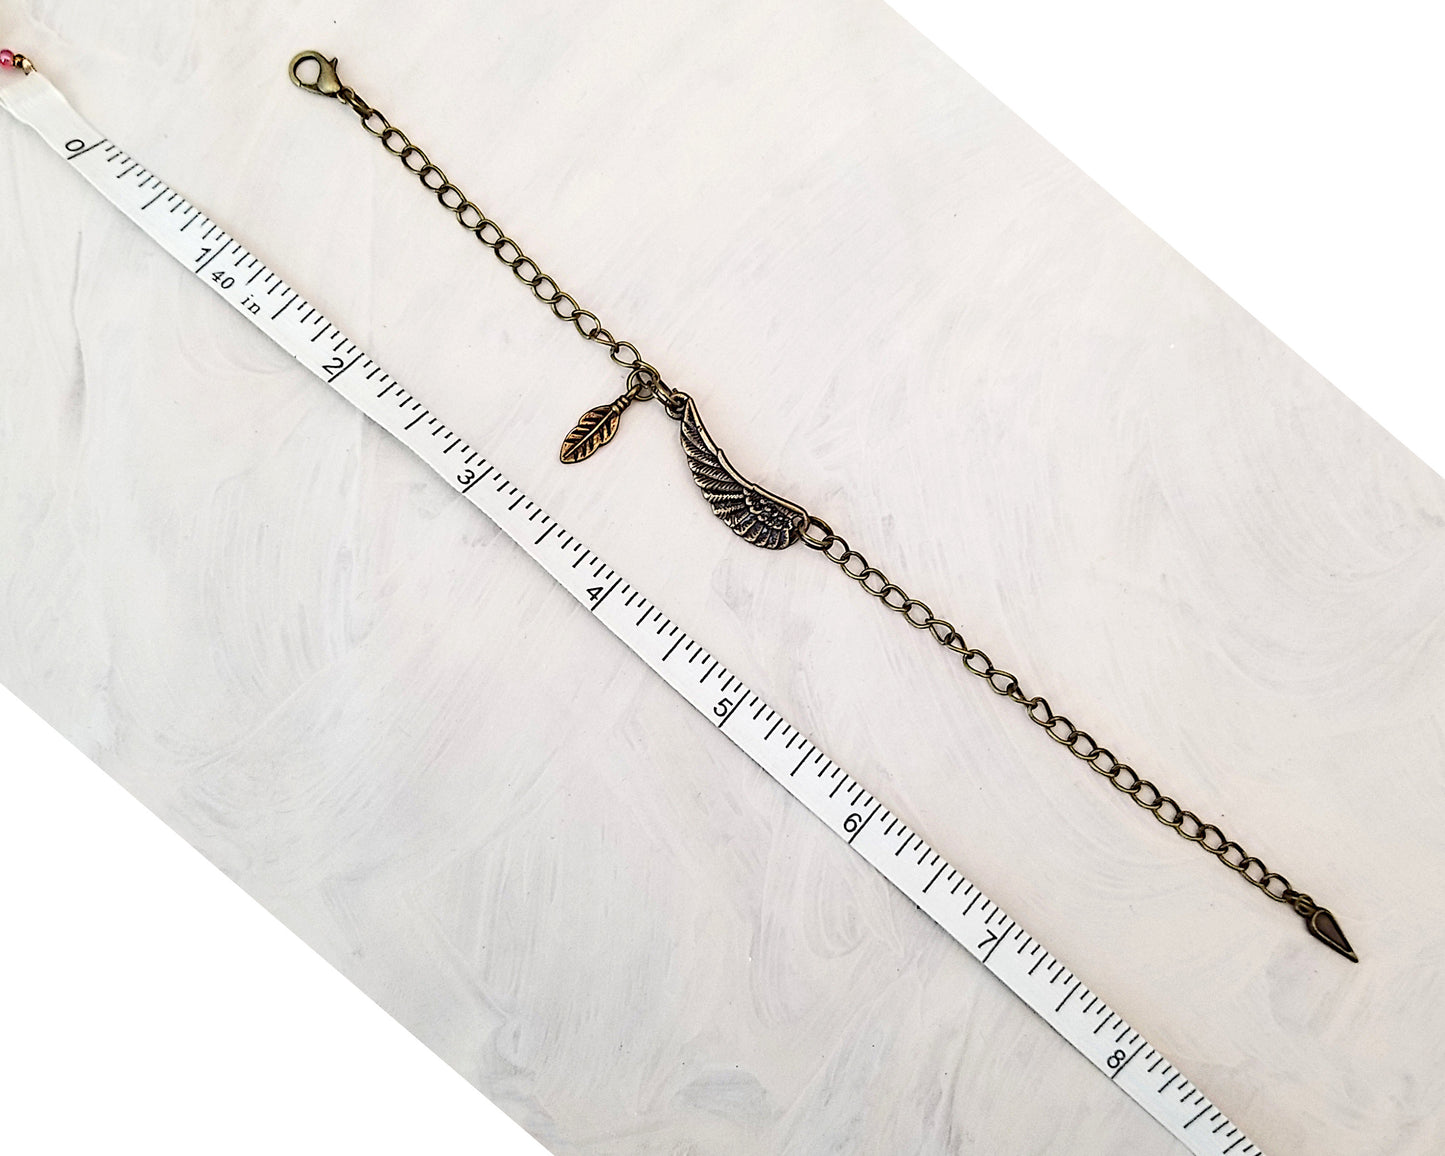 Simple Chain Choker, Bracelet or Anklet with Wing and Feather, Unisex, Choice of Colors, Lobster Clasp, Adjustable, Customized Length